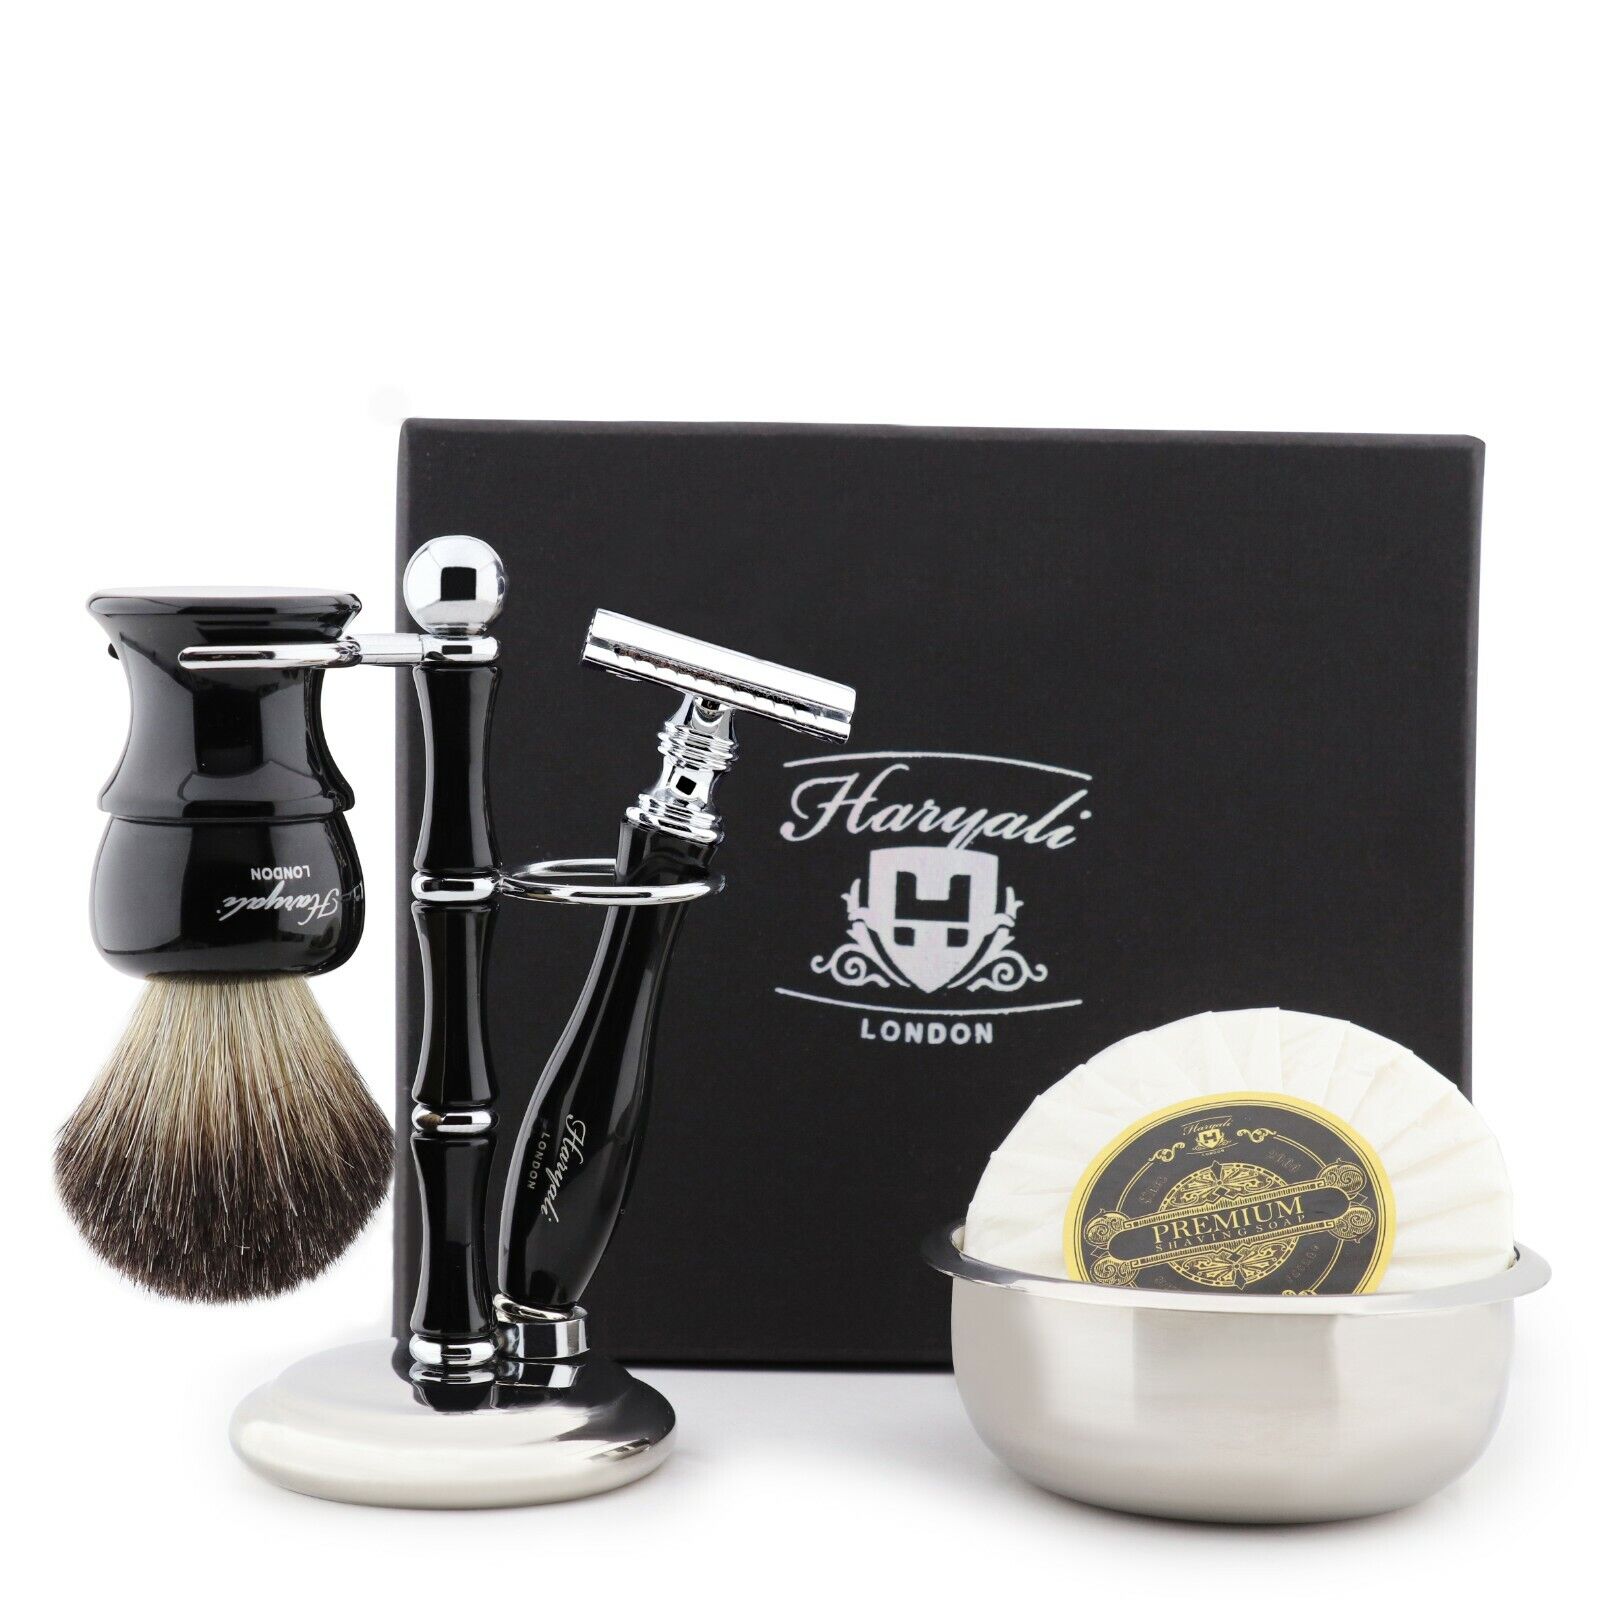 Classic Male Grooming Traditional Shaving Kit With Safety Razor & Brush, Resin